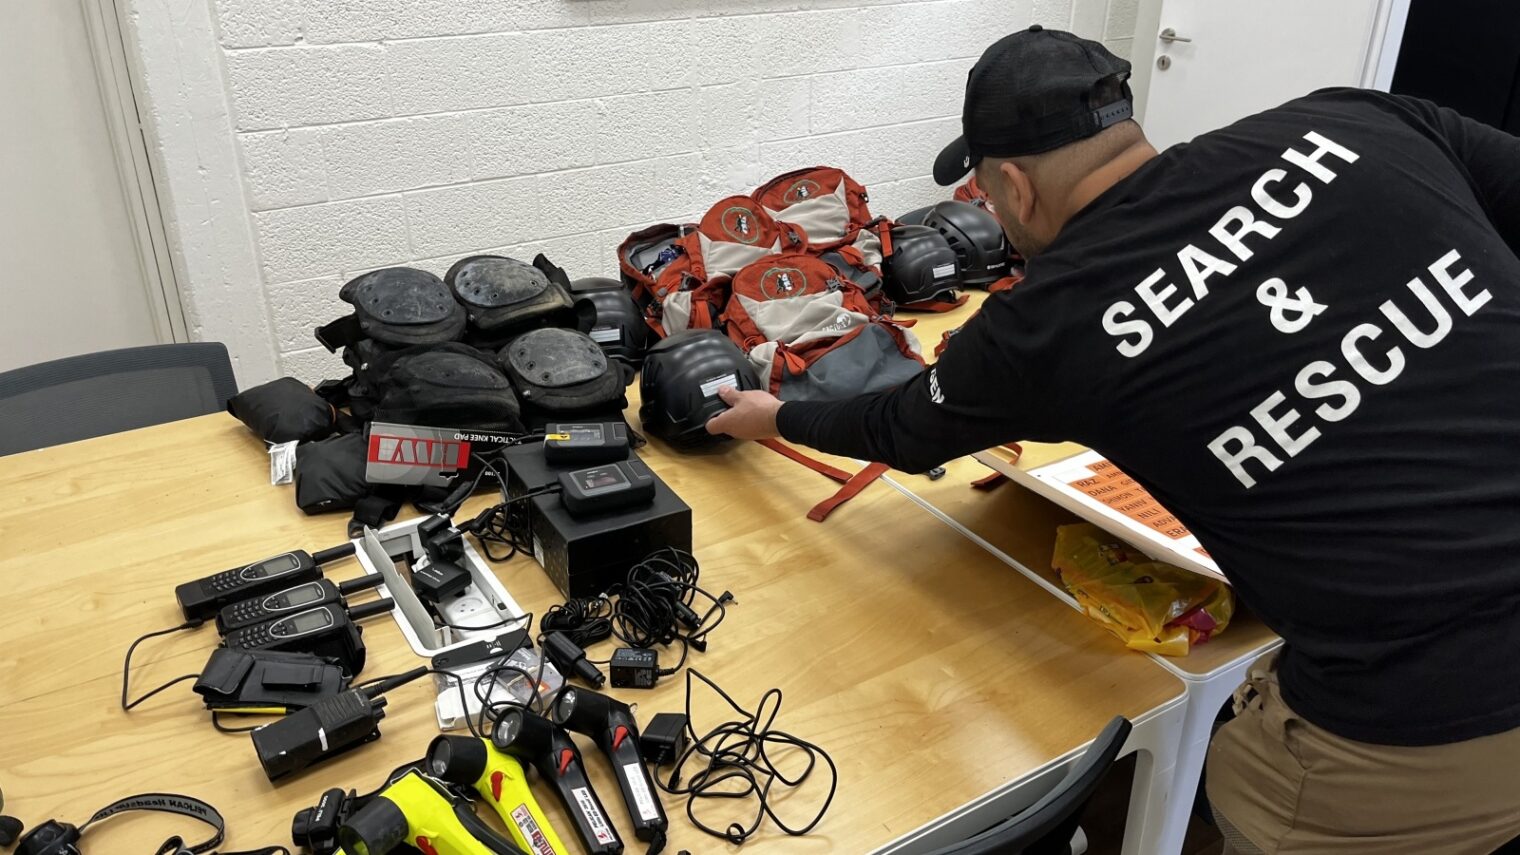 An Israeli rescue worker prepares equipment for today's mission to Turkey. Photo courtesy of SmartAID